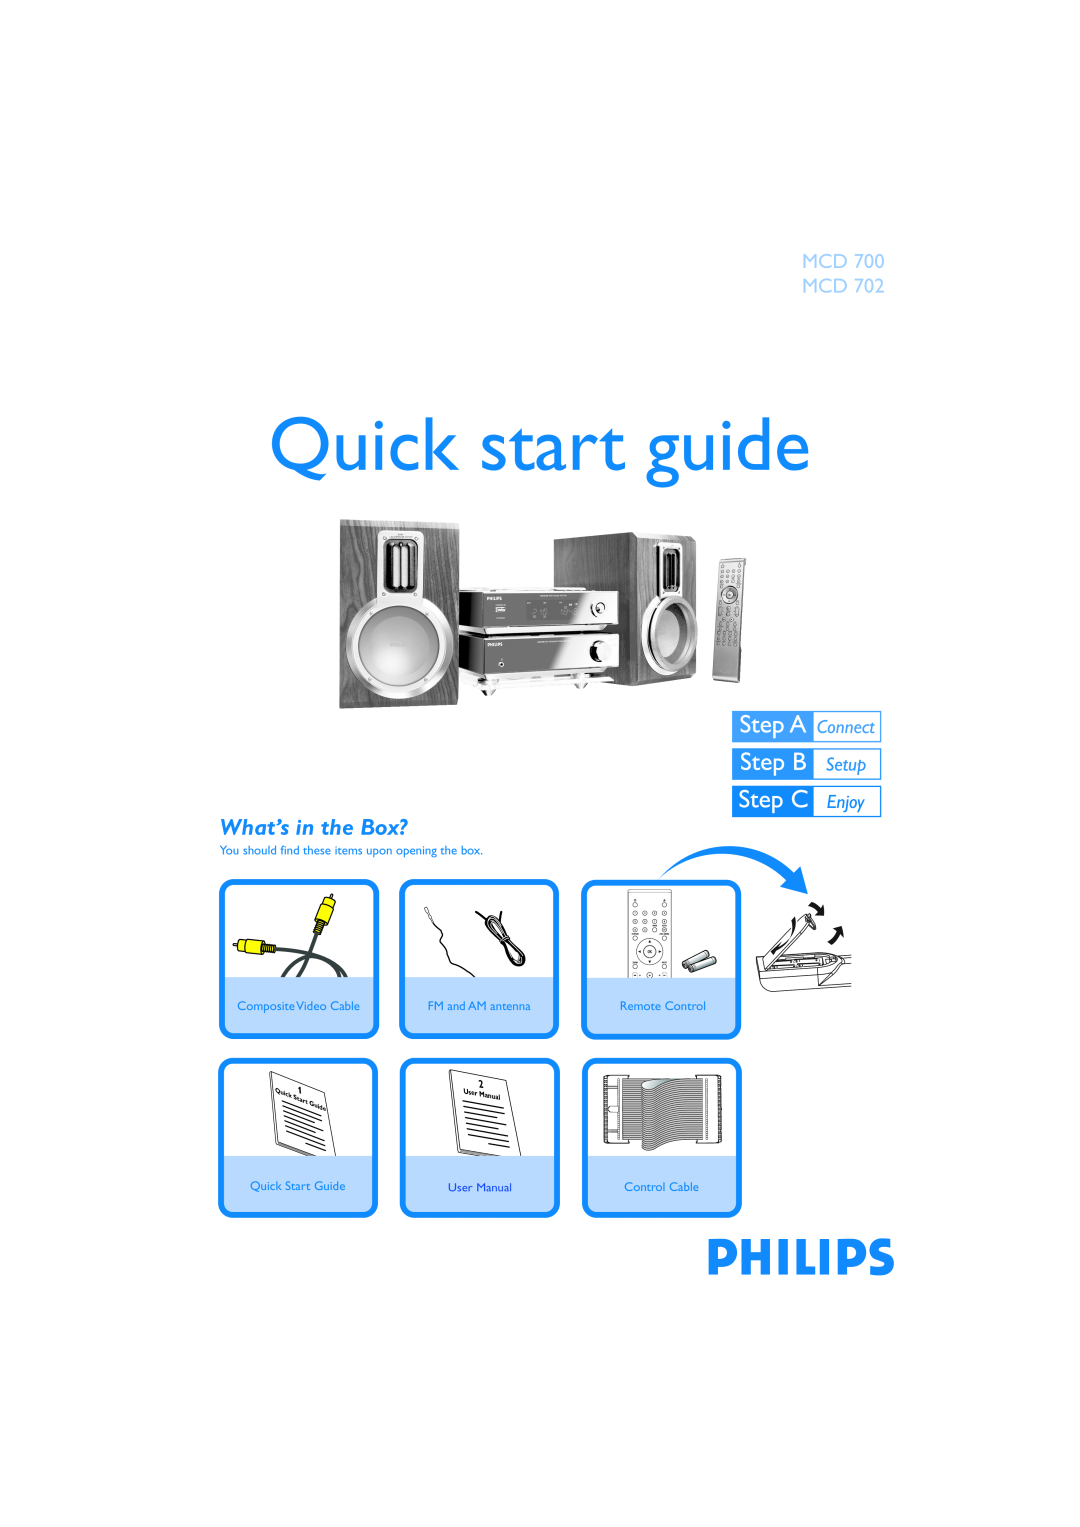 Philips MCD 702 quick start What’s in the Box?, Quick start guide, Mcd Mcd, Composite Video Cable, FM and AM antenna 